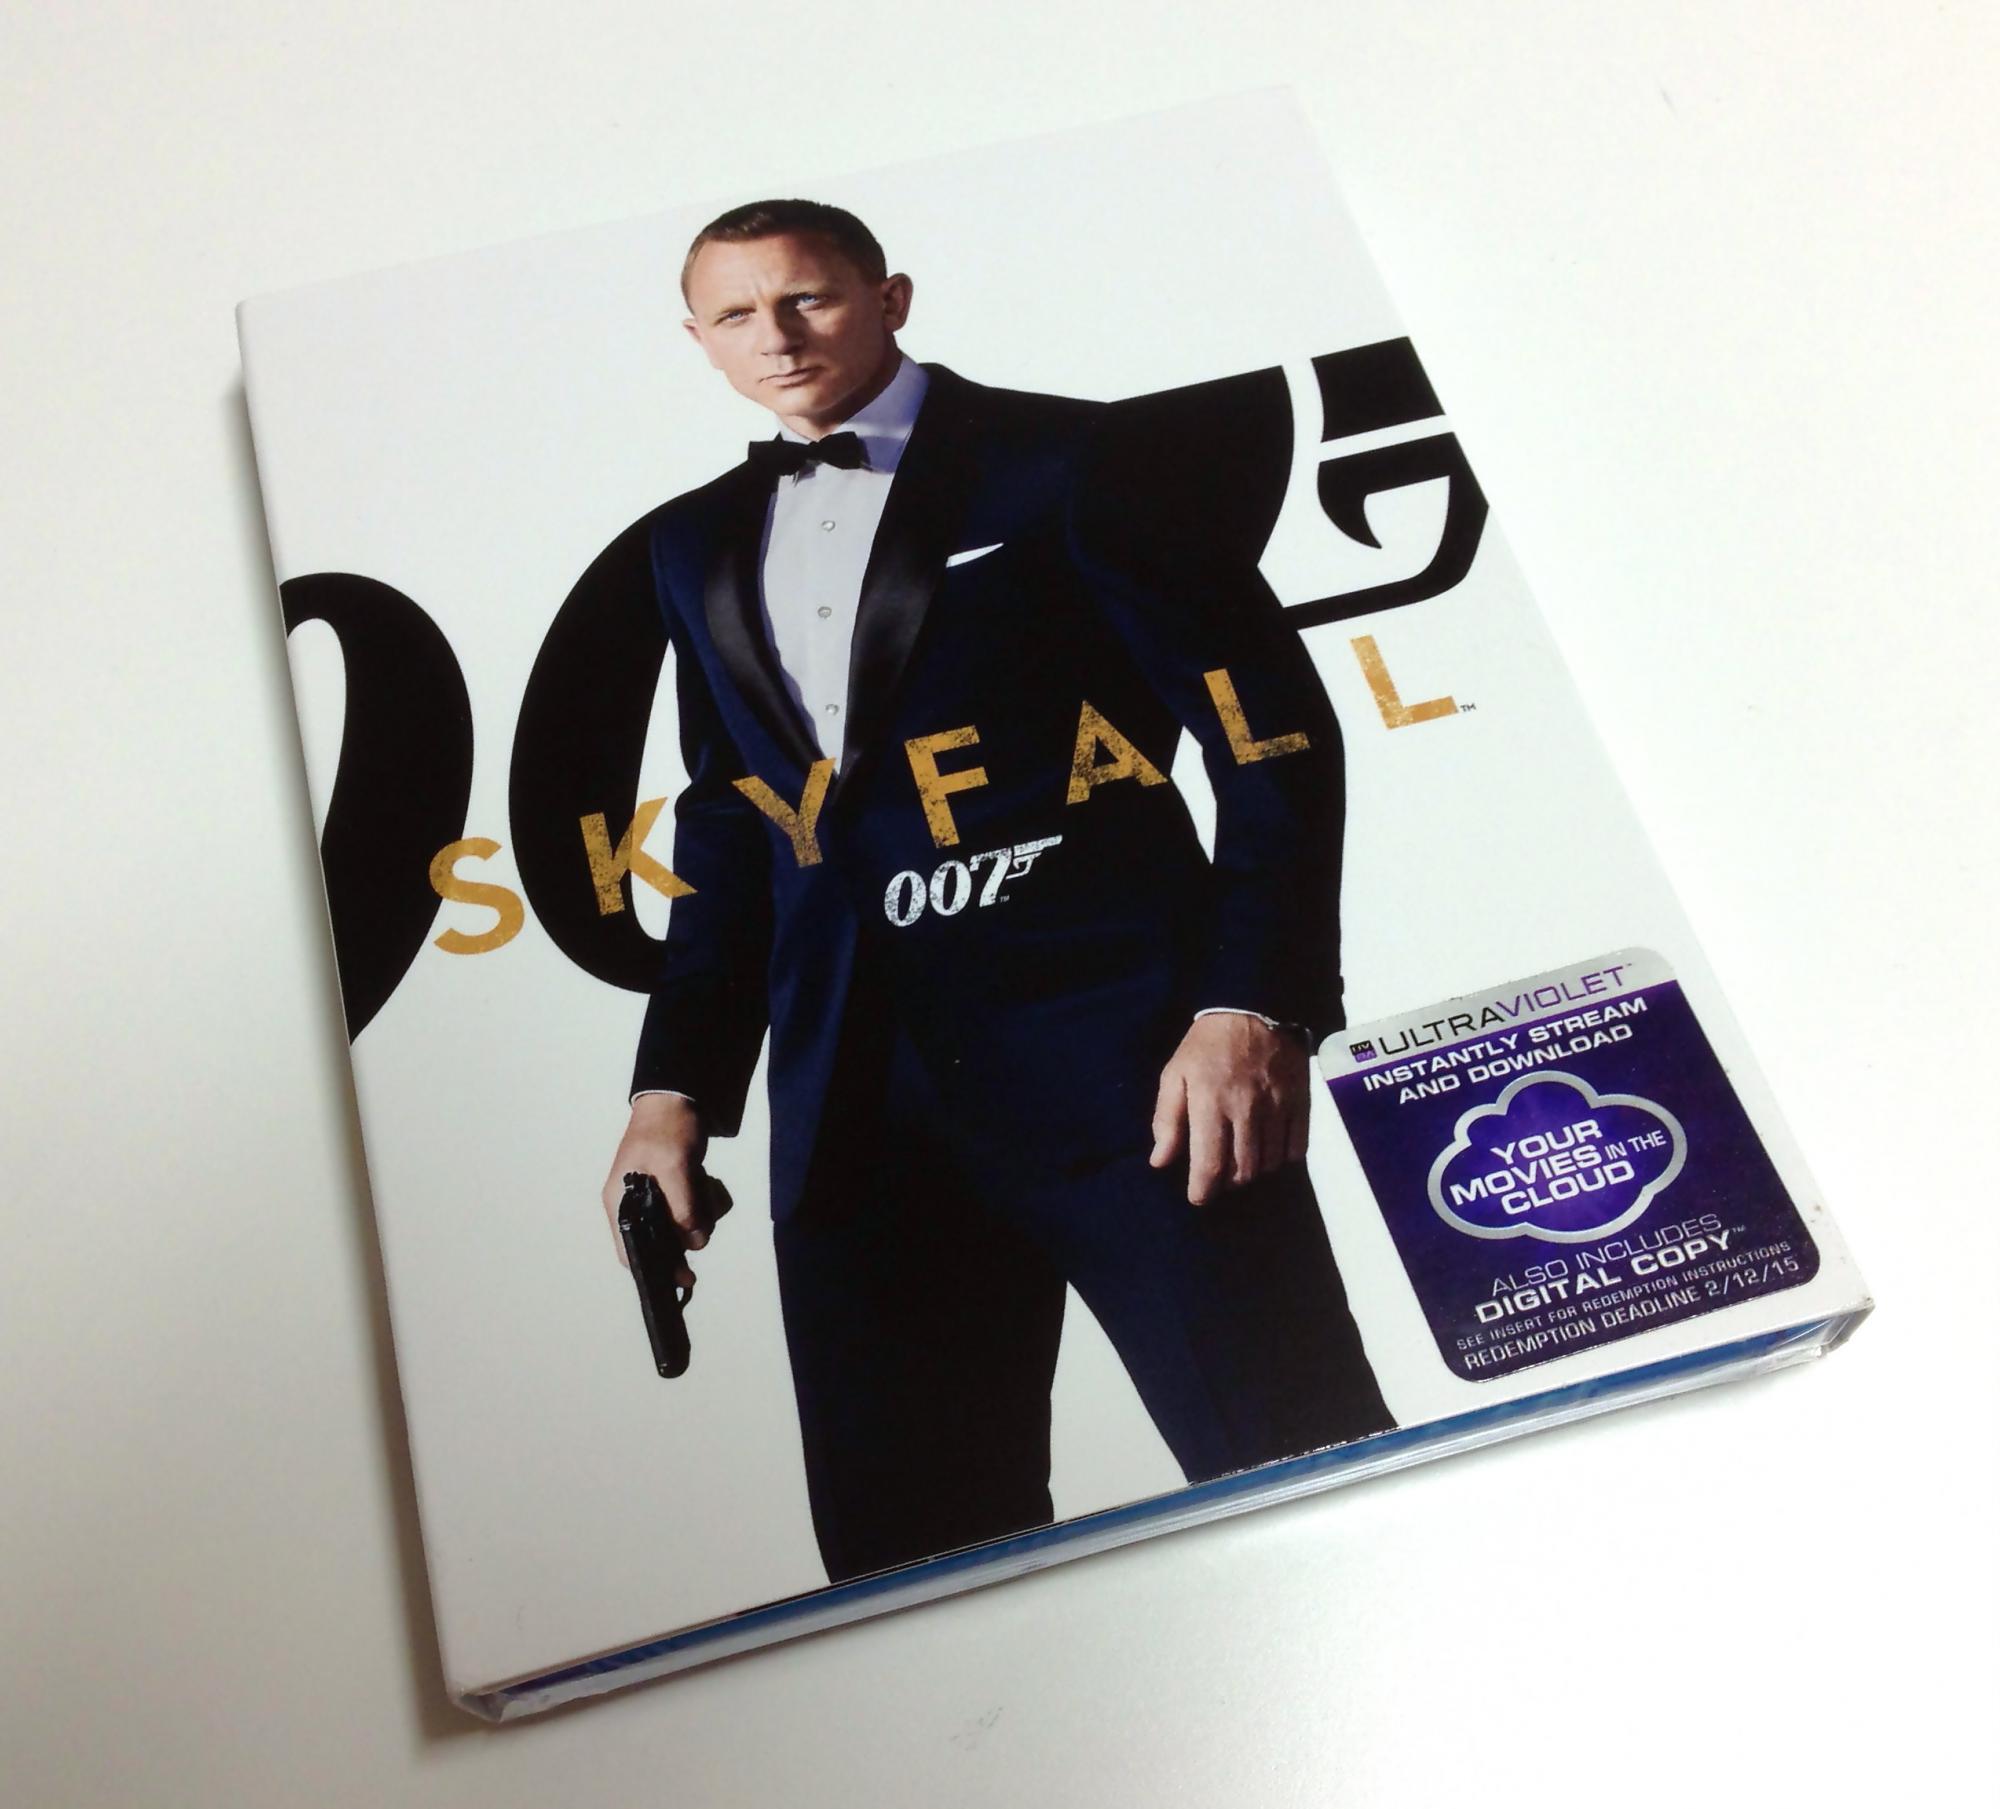 Skyfall [Foxconnect.com Exclusive]